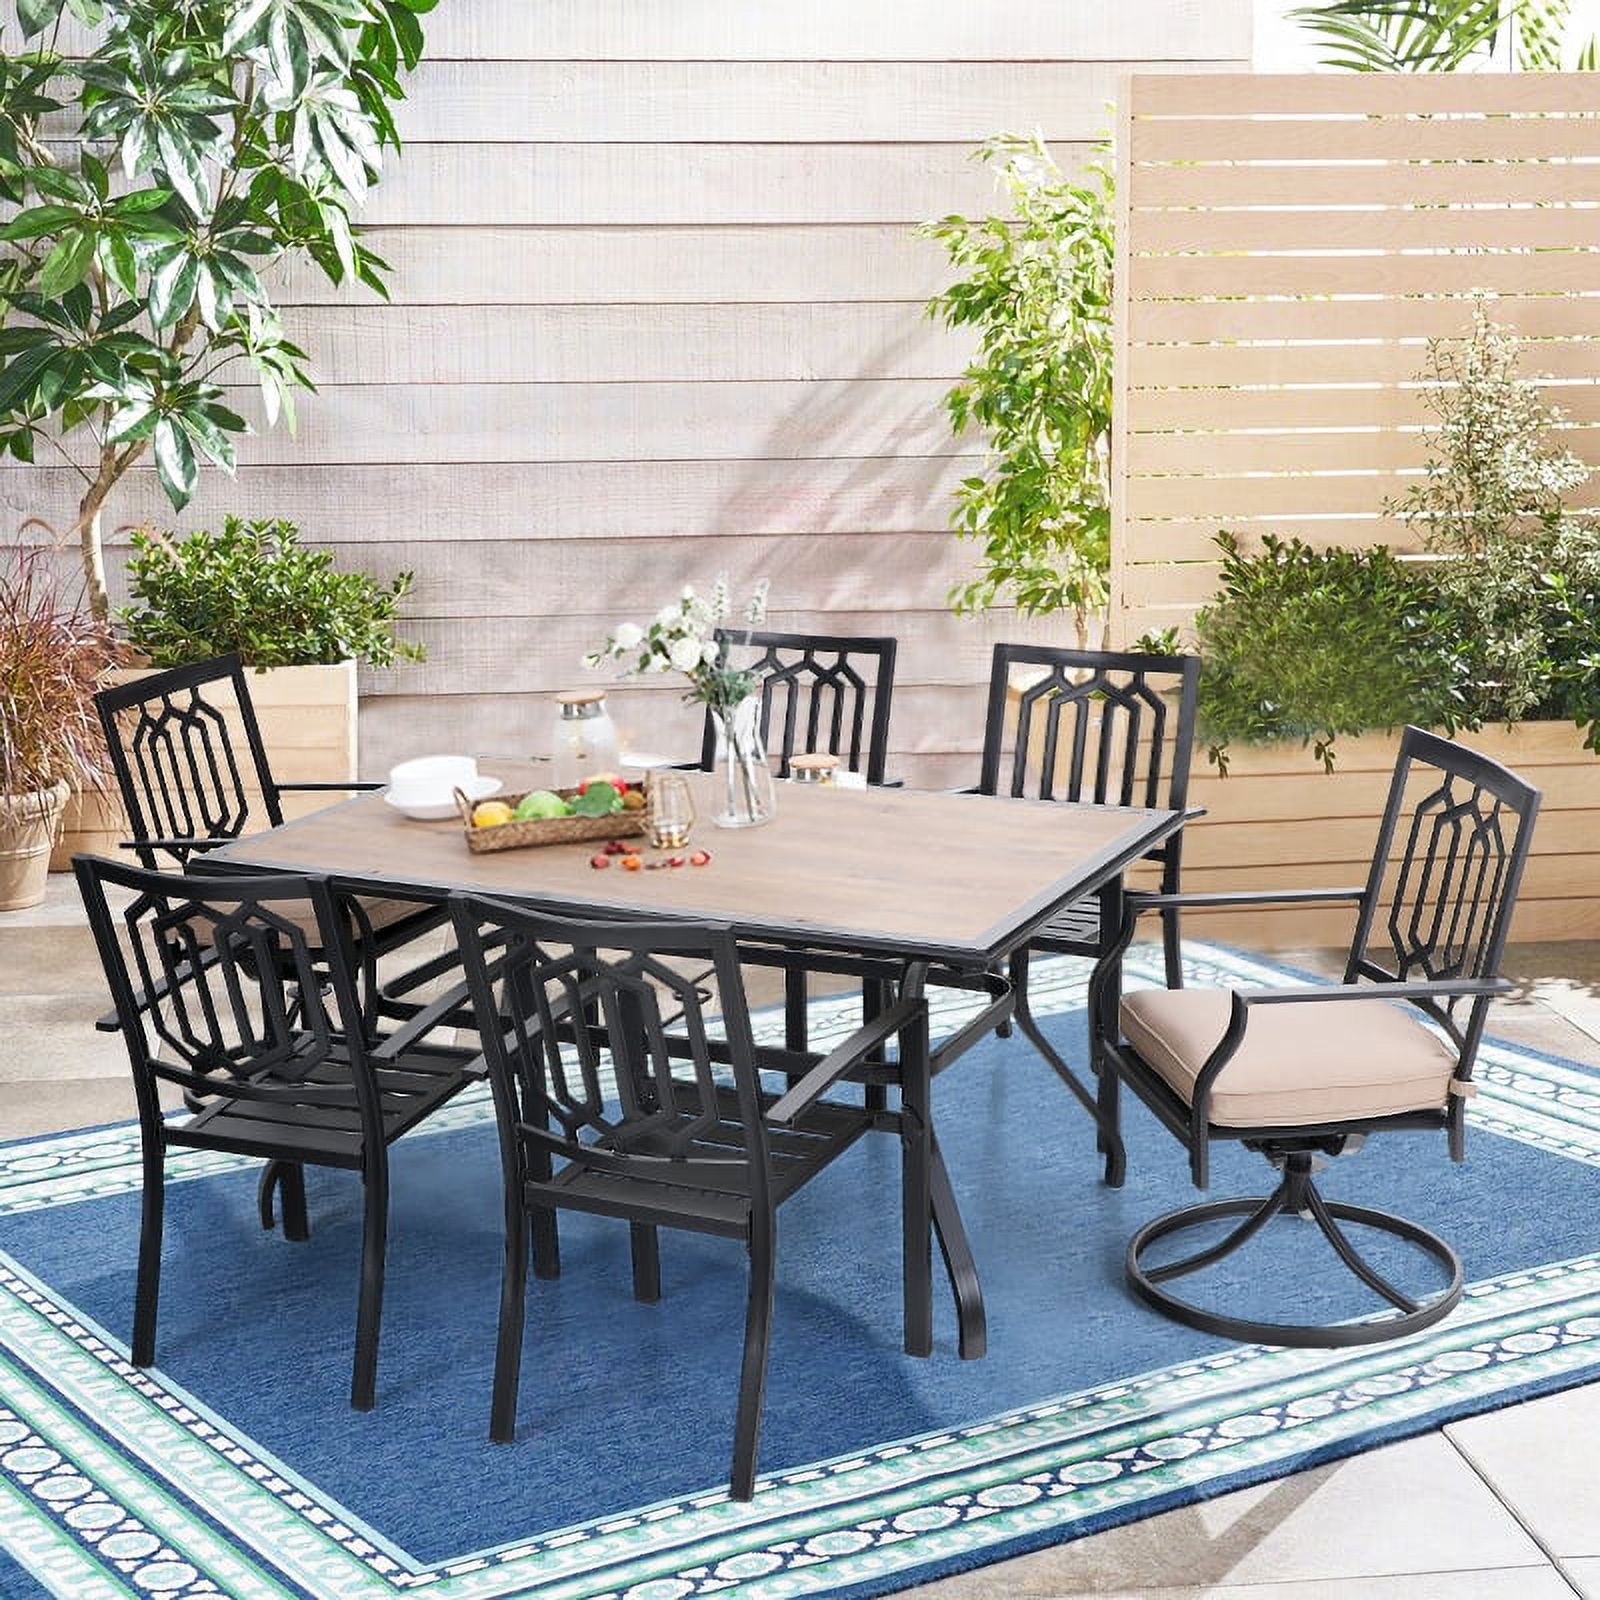 MF Studio 7PCS Patio Dining Set Metal Outdoor Furniture with 4PCS Metal Dining Chairs and 2PCS Swivel Dining Chairs and 1PC Rectangular Dining Table Suitable for Patio Garden Backyard Dining Room - image 1 of 8